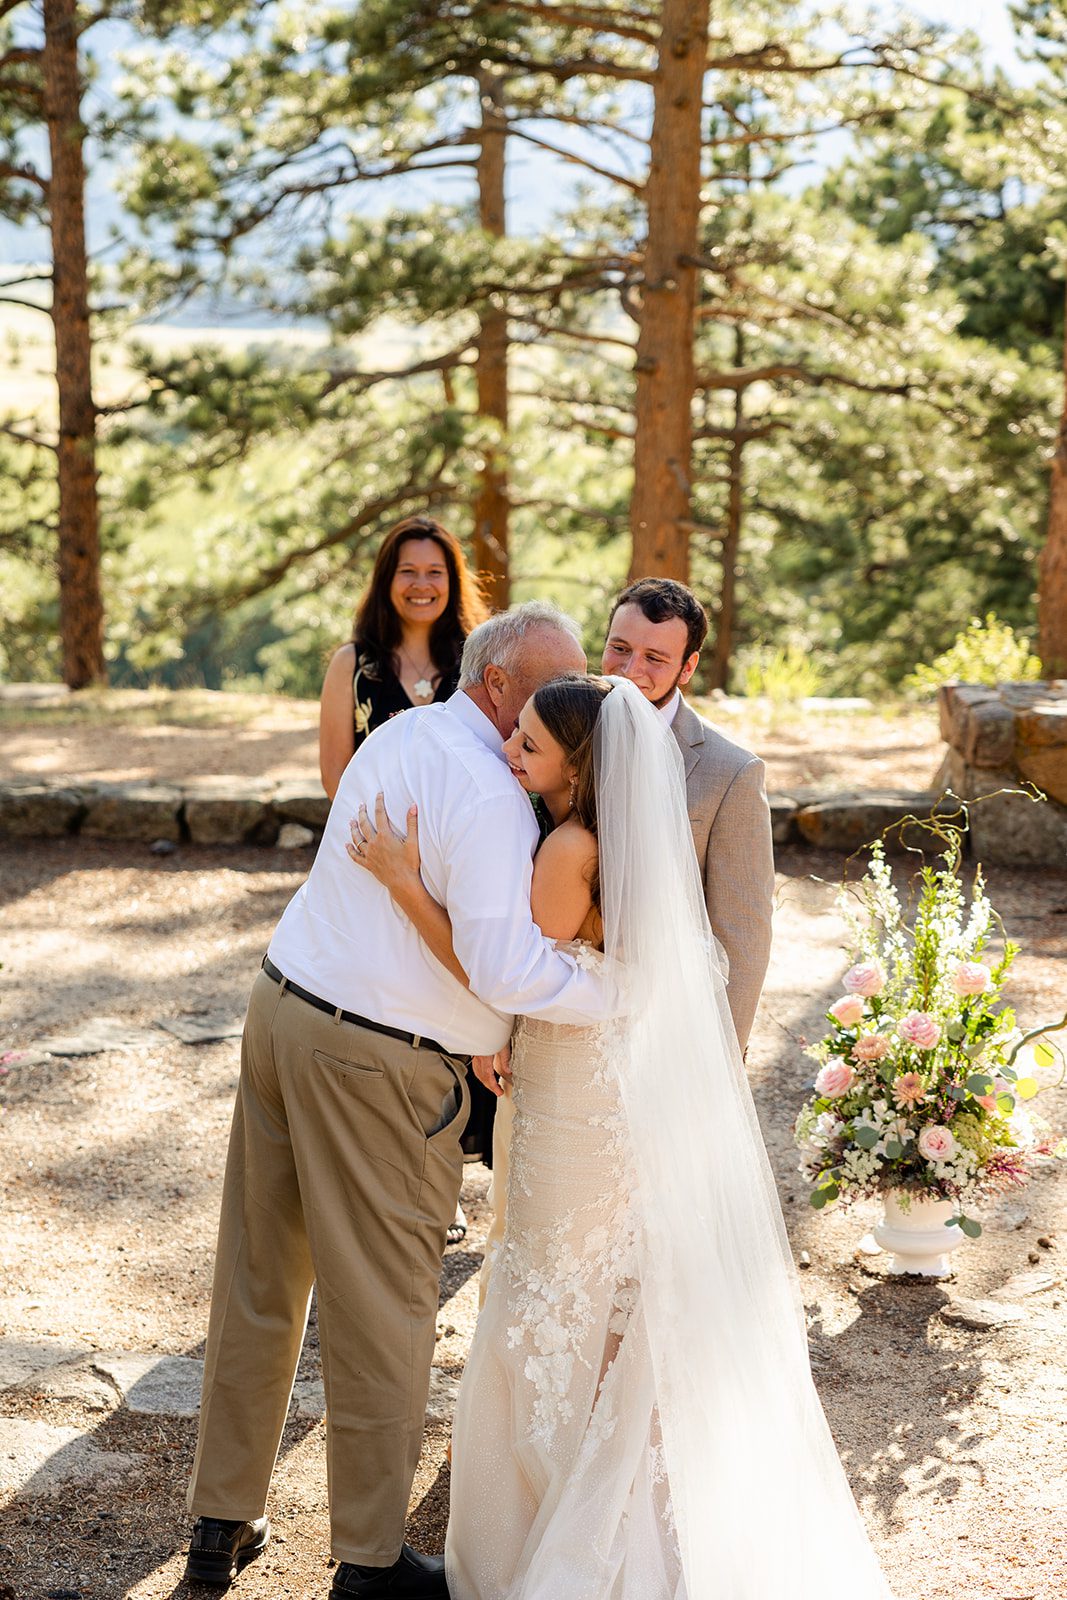 The father of the bride hugs his daughter, the bride. The groom looks at them with love in his eyes. 